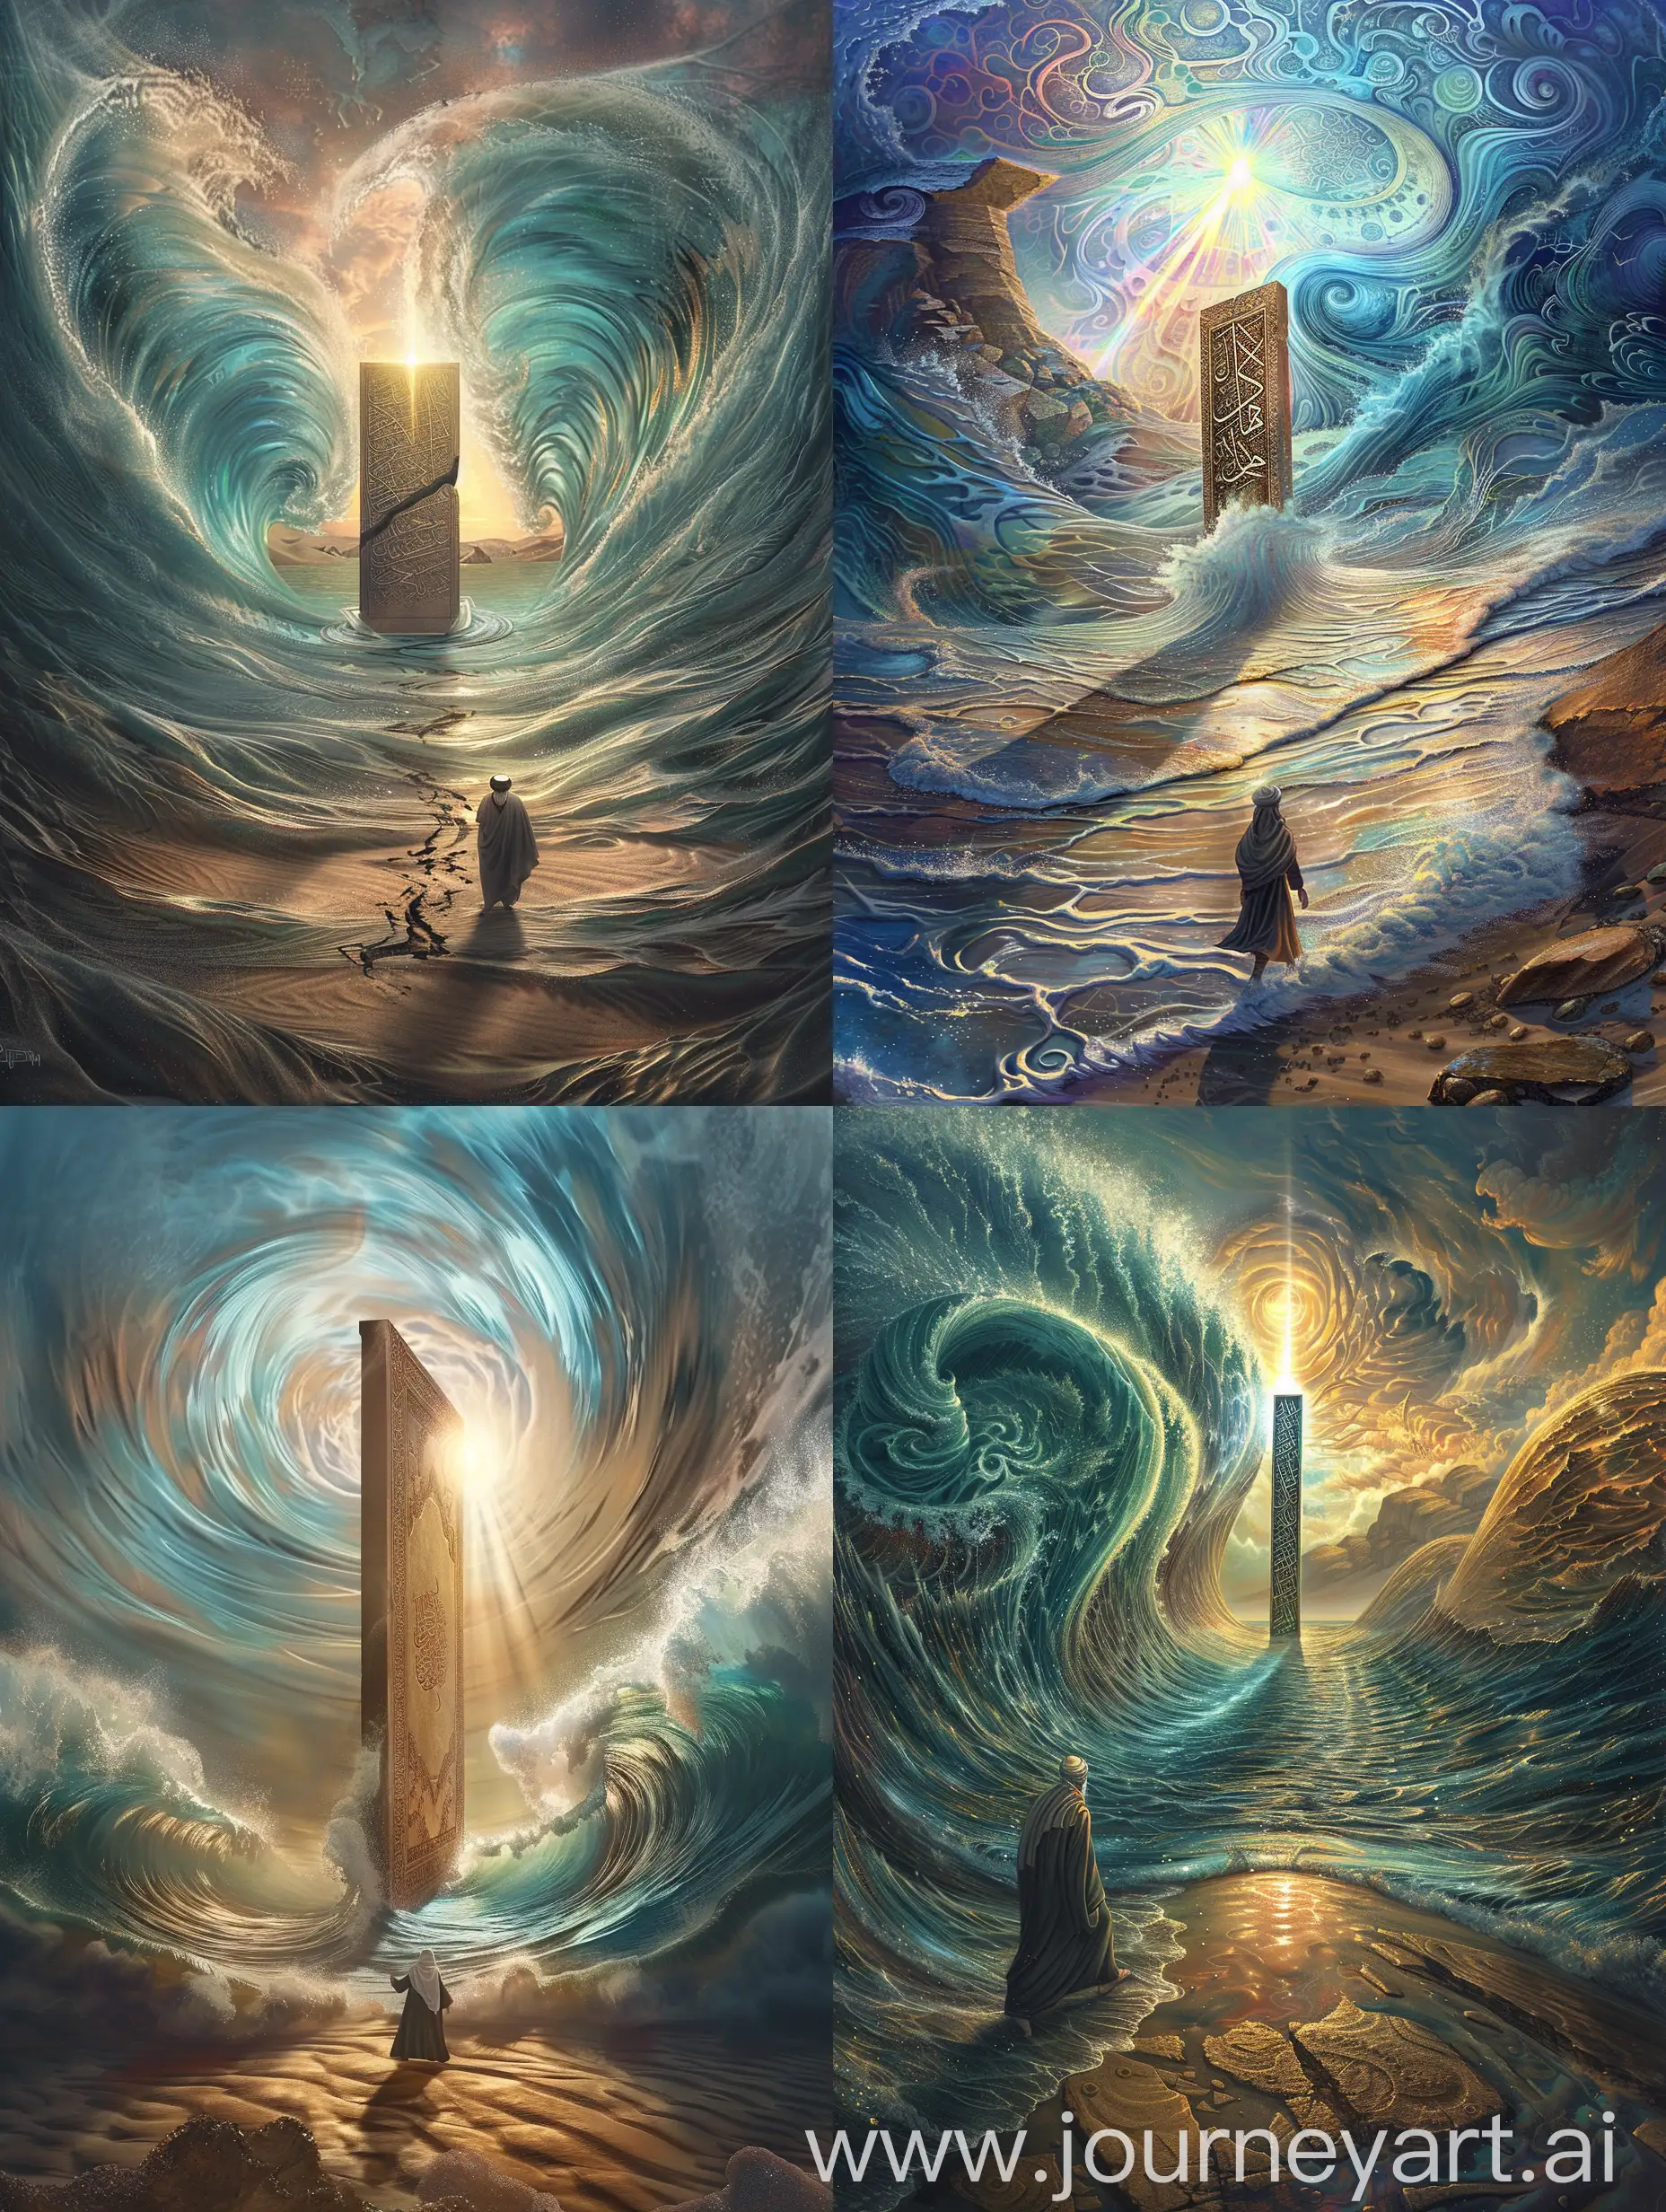 over the shoulder angle of parting of the sea with a wiseman walking on the dry land , with a huge vertically flat rectangular stone in the middle of a majestic light in the sky guiding the man.
huge waves in motion
cinematic, swirling patterns, kaleidoscope of colors.
photorealistic, intricate, islamic
highly detailed, epic composition, epic proportion top quality, best quality, official art, beautiful and aesthetic:1.2 award winning